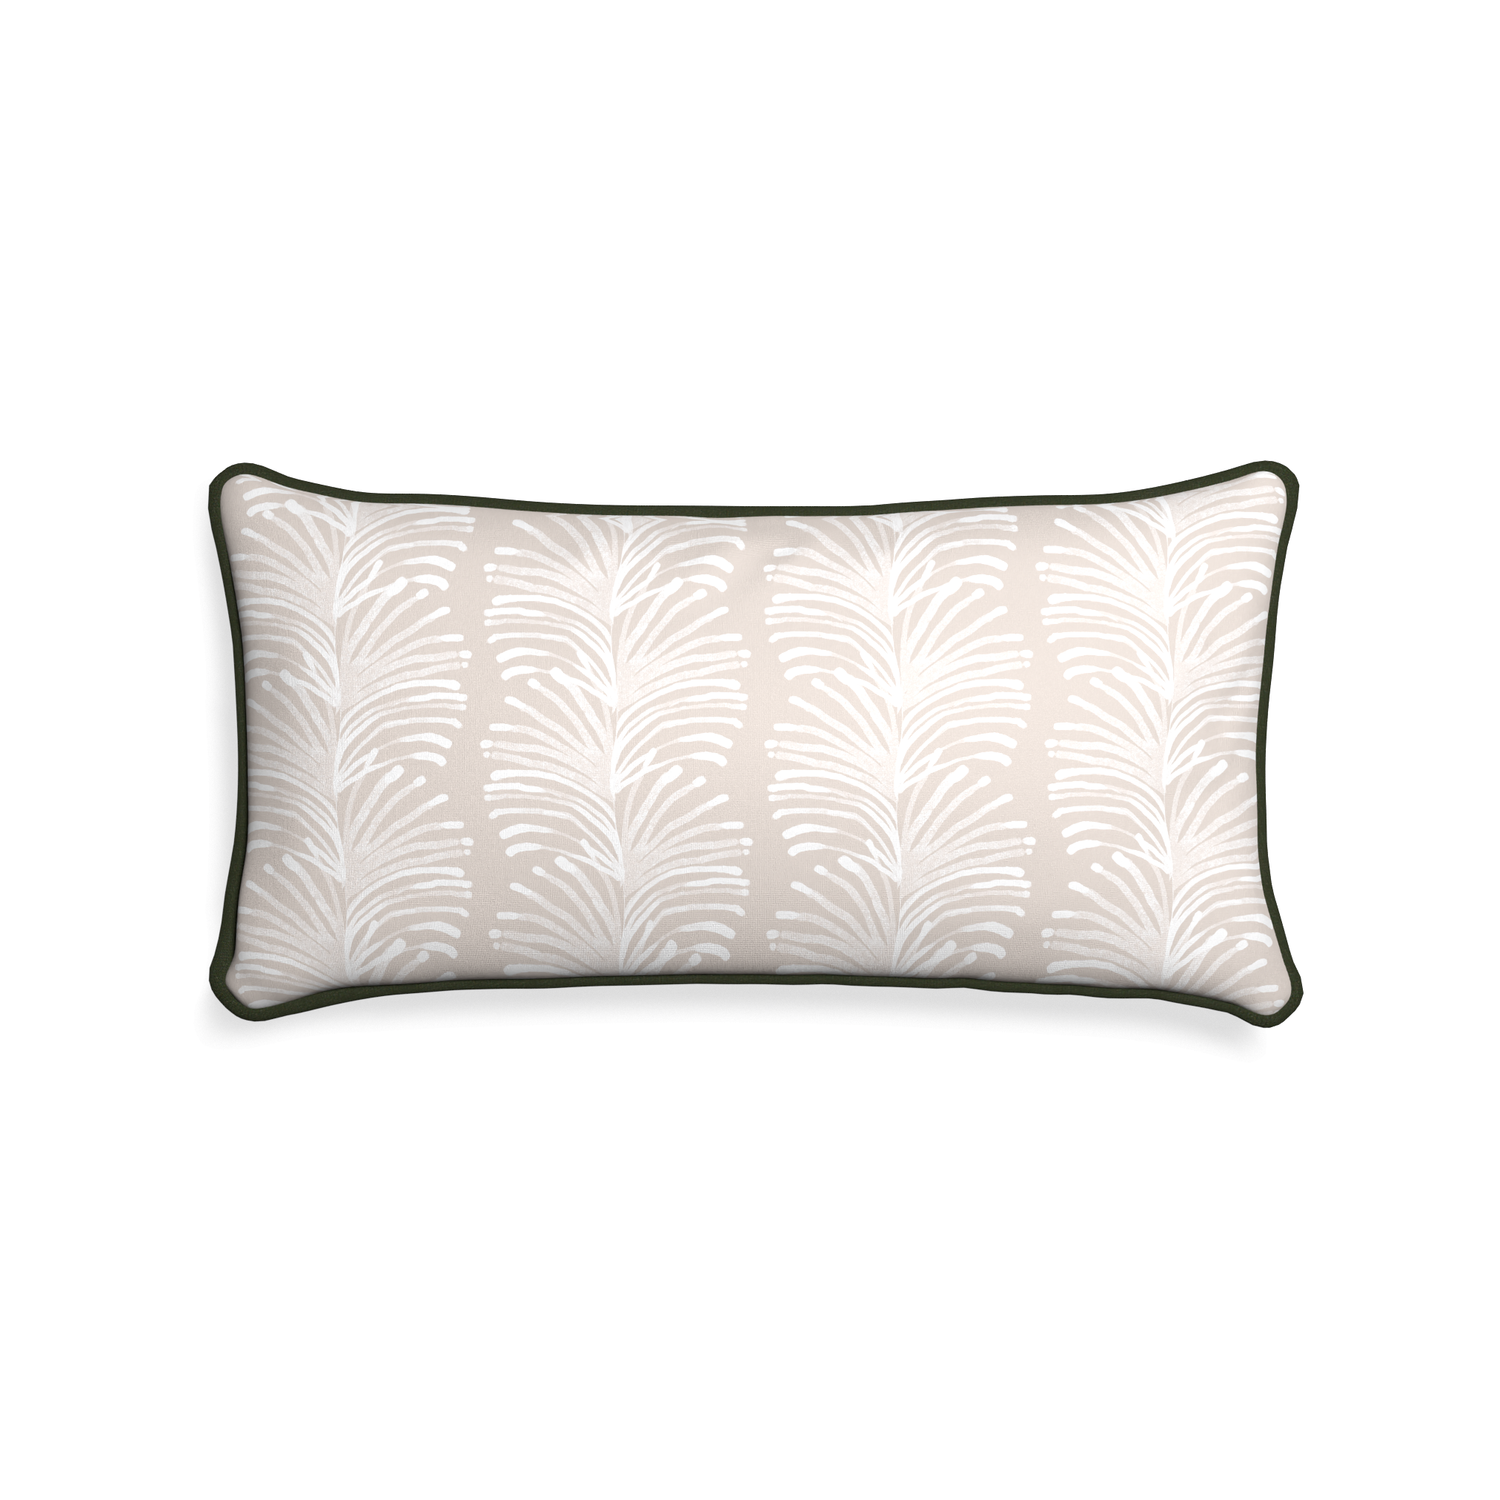 Midi-lumbar emma sand custom sand colored botanical stripepillow with f piping on white background